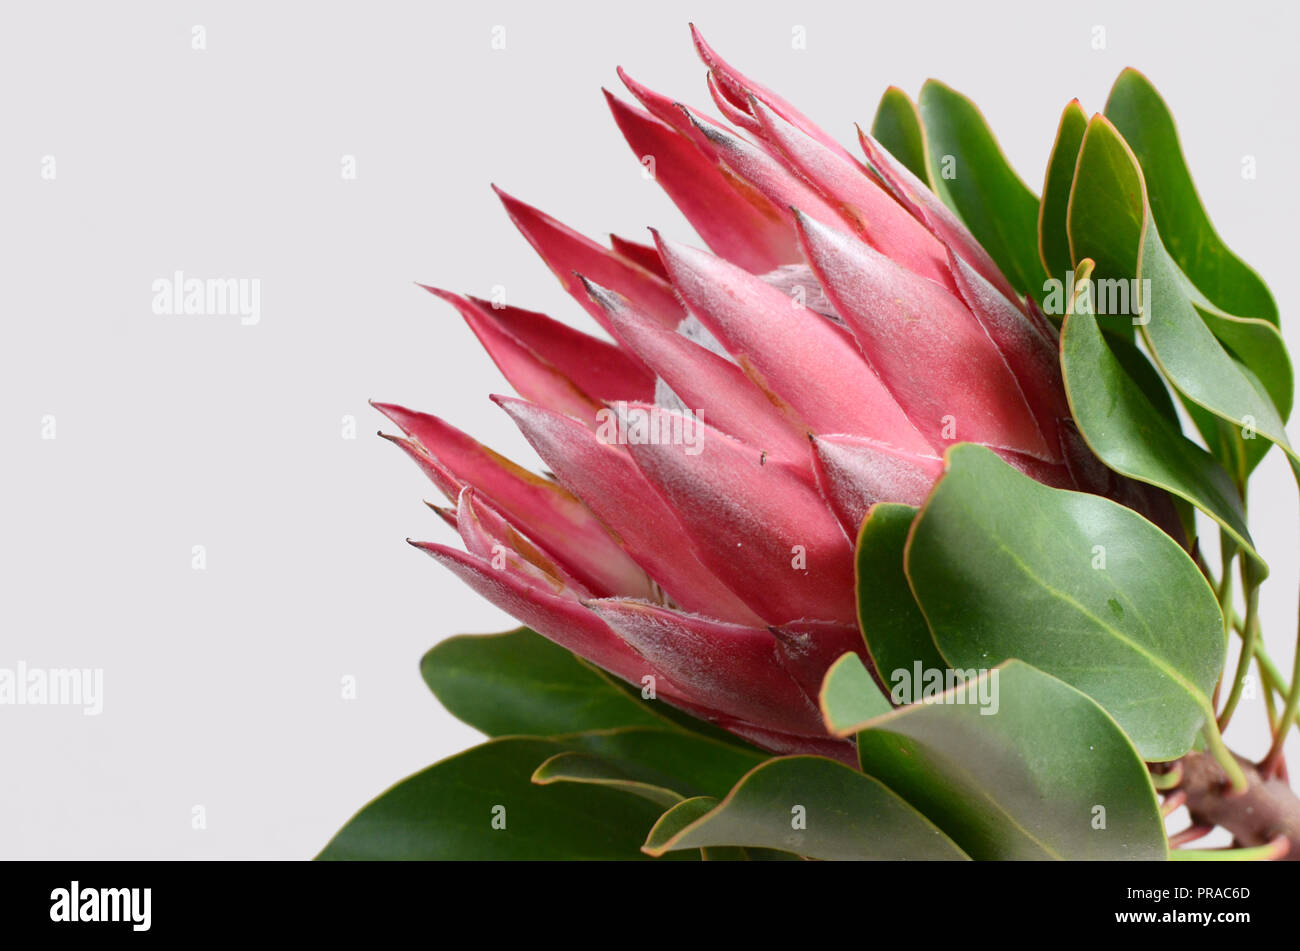 King protea plant for background Stock Photo